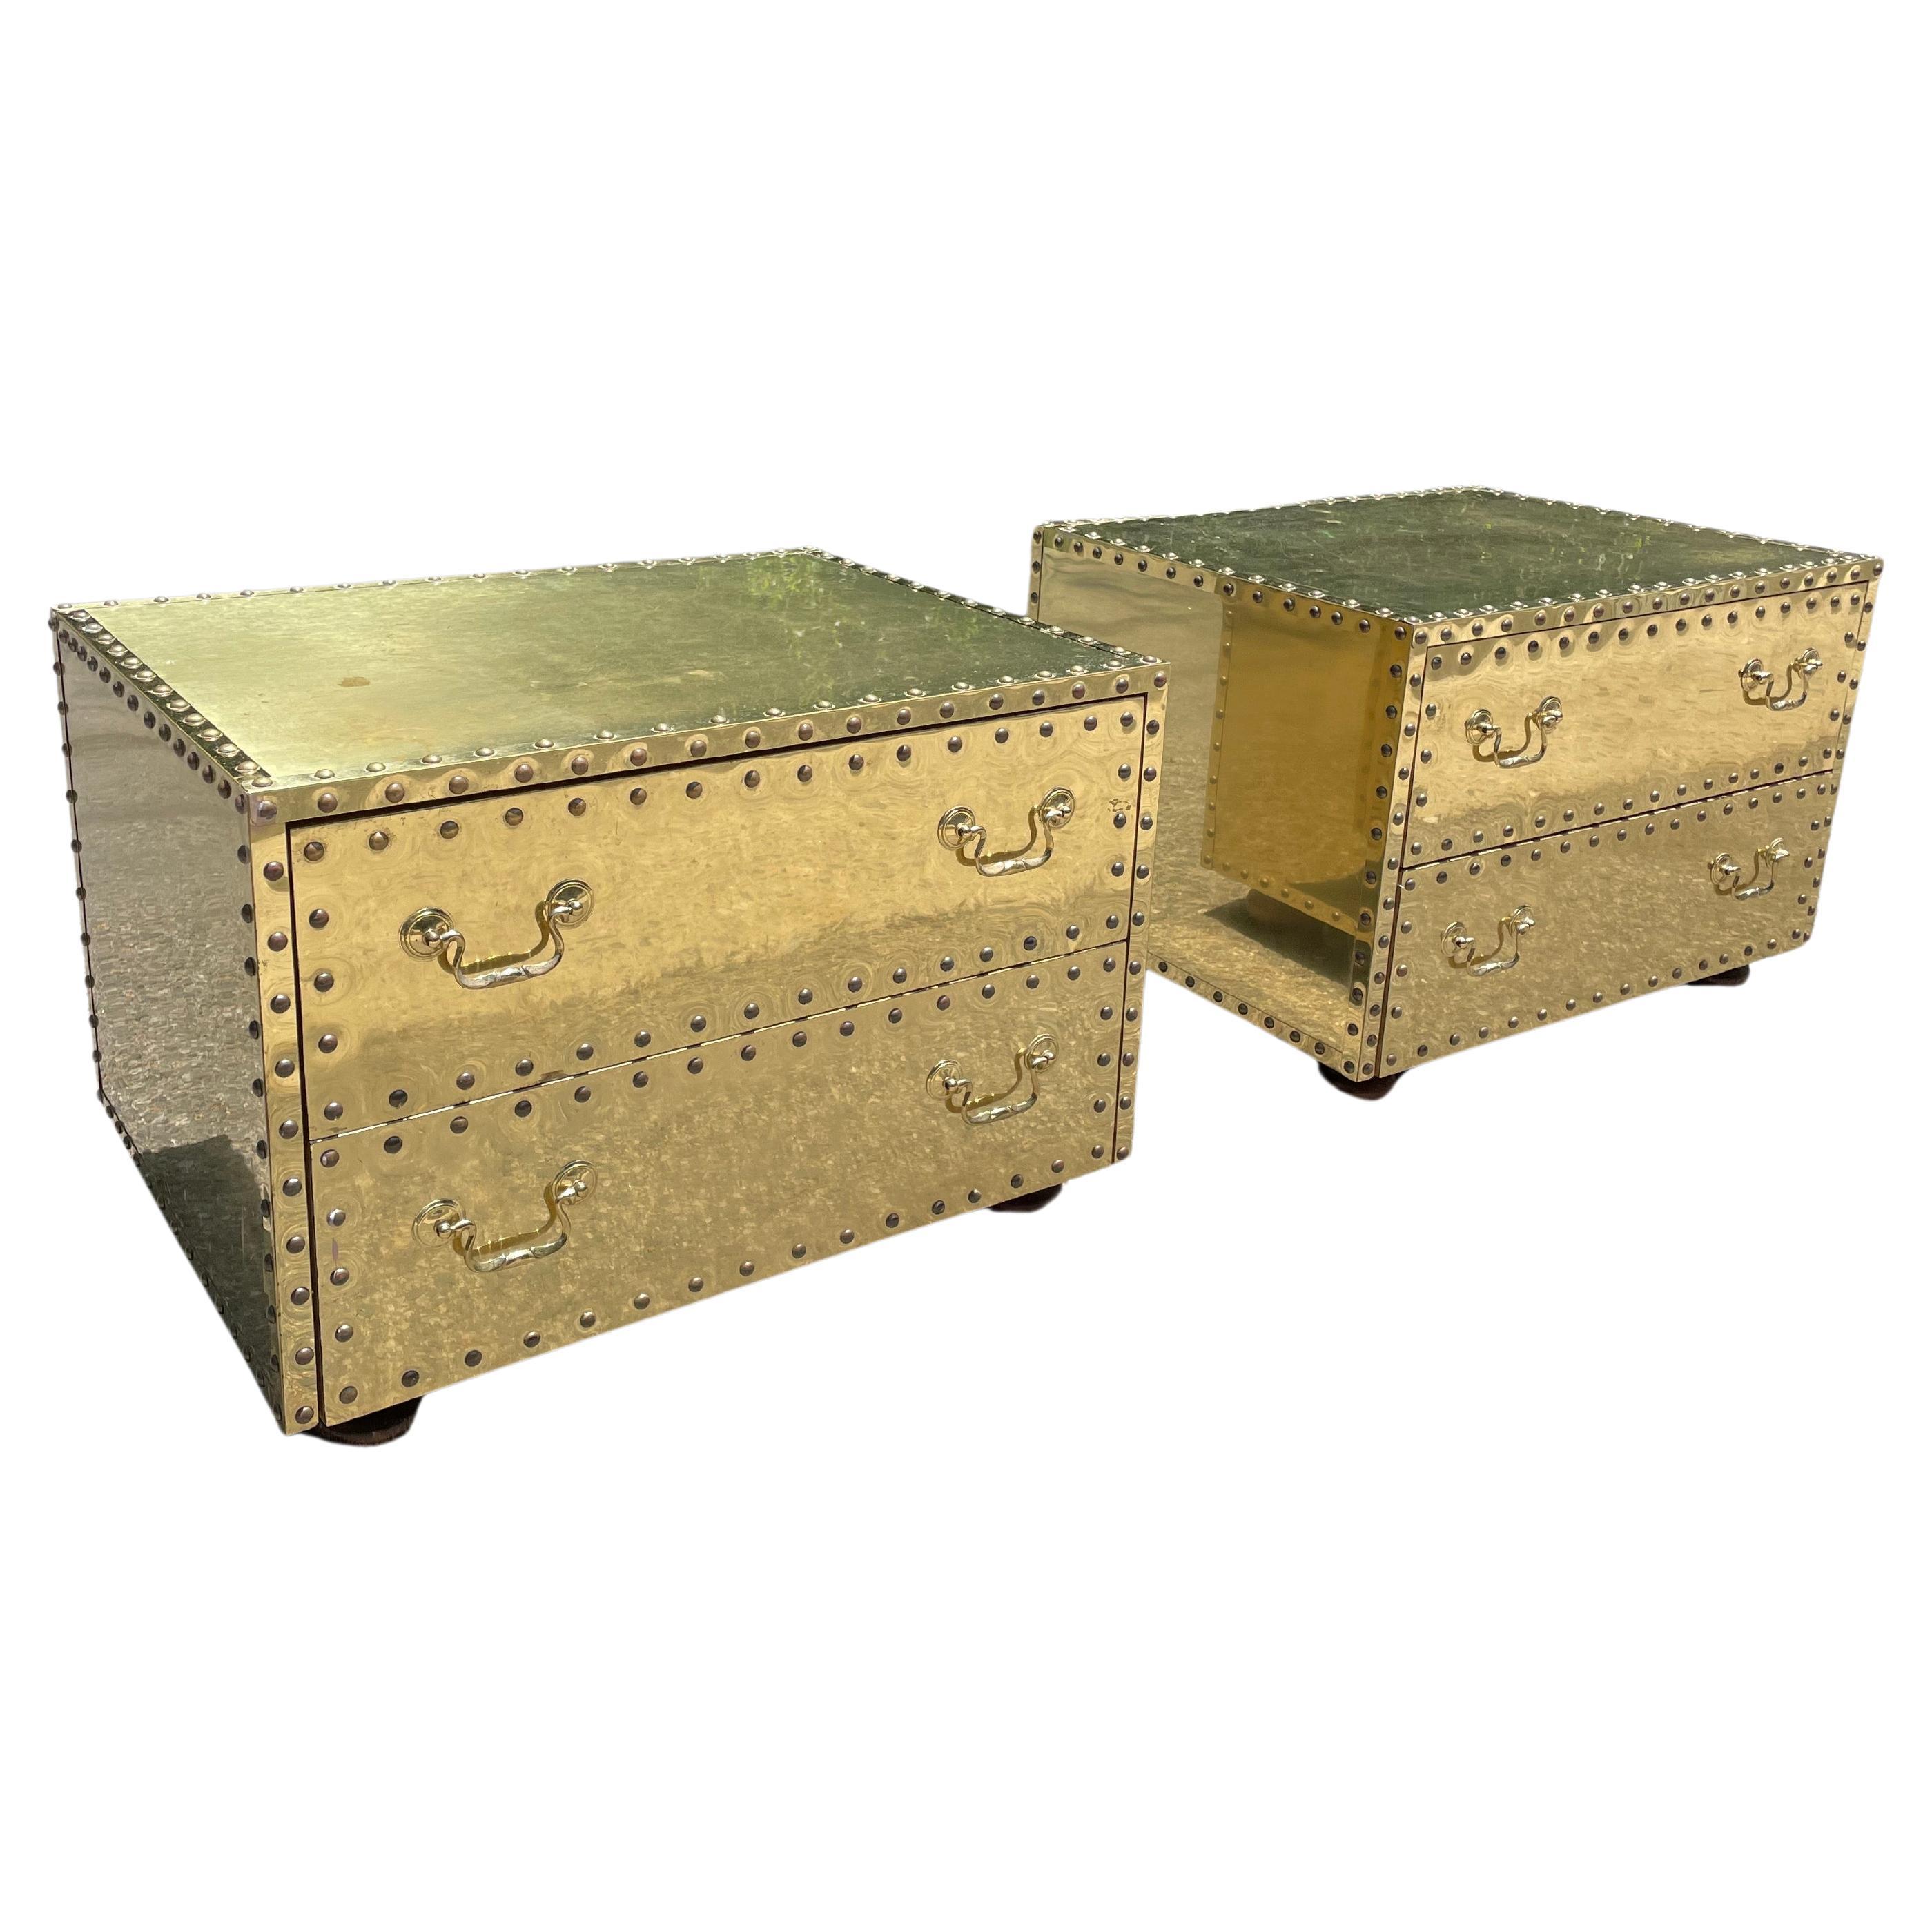 Two drawer mid-century glamorous nightstands / end tables by Sarreid. Circa 1970s.

These are clad in brass with nailhead trim. Two drawers per nightstand.

This glam piece pairs well with mid-century, hollywood regency, post modern, danish